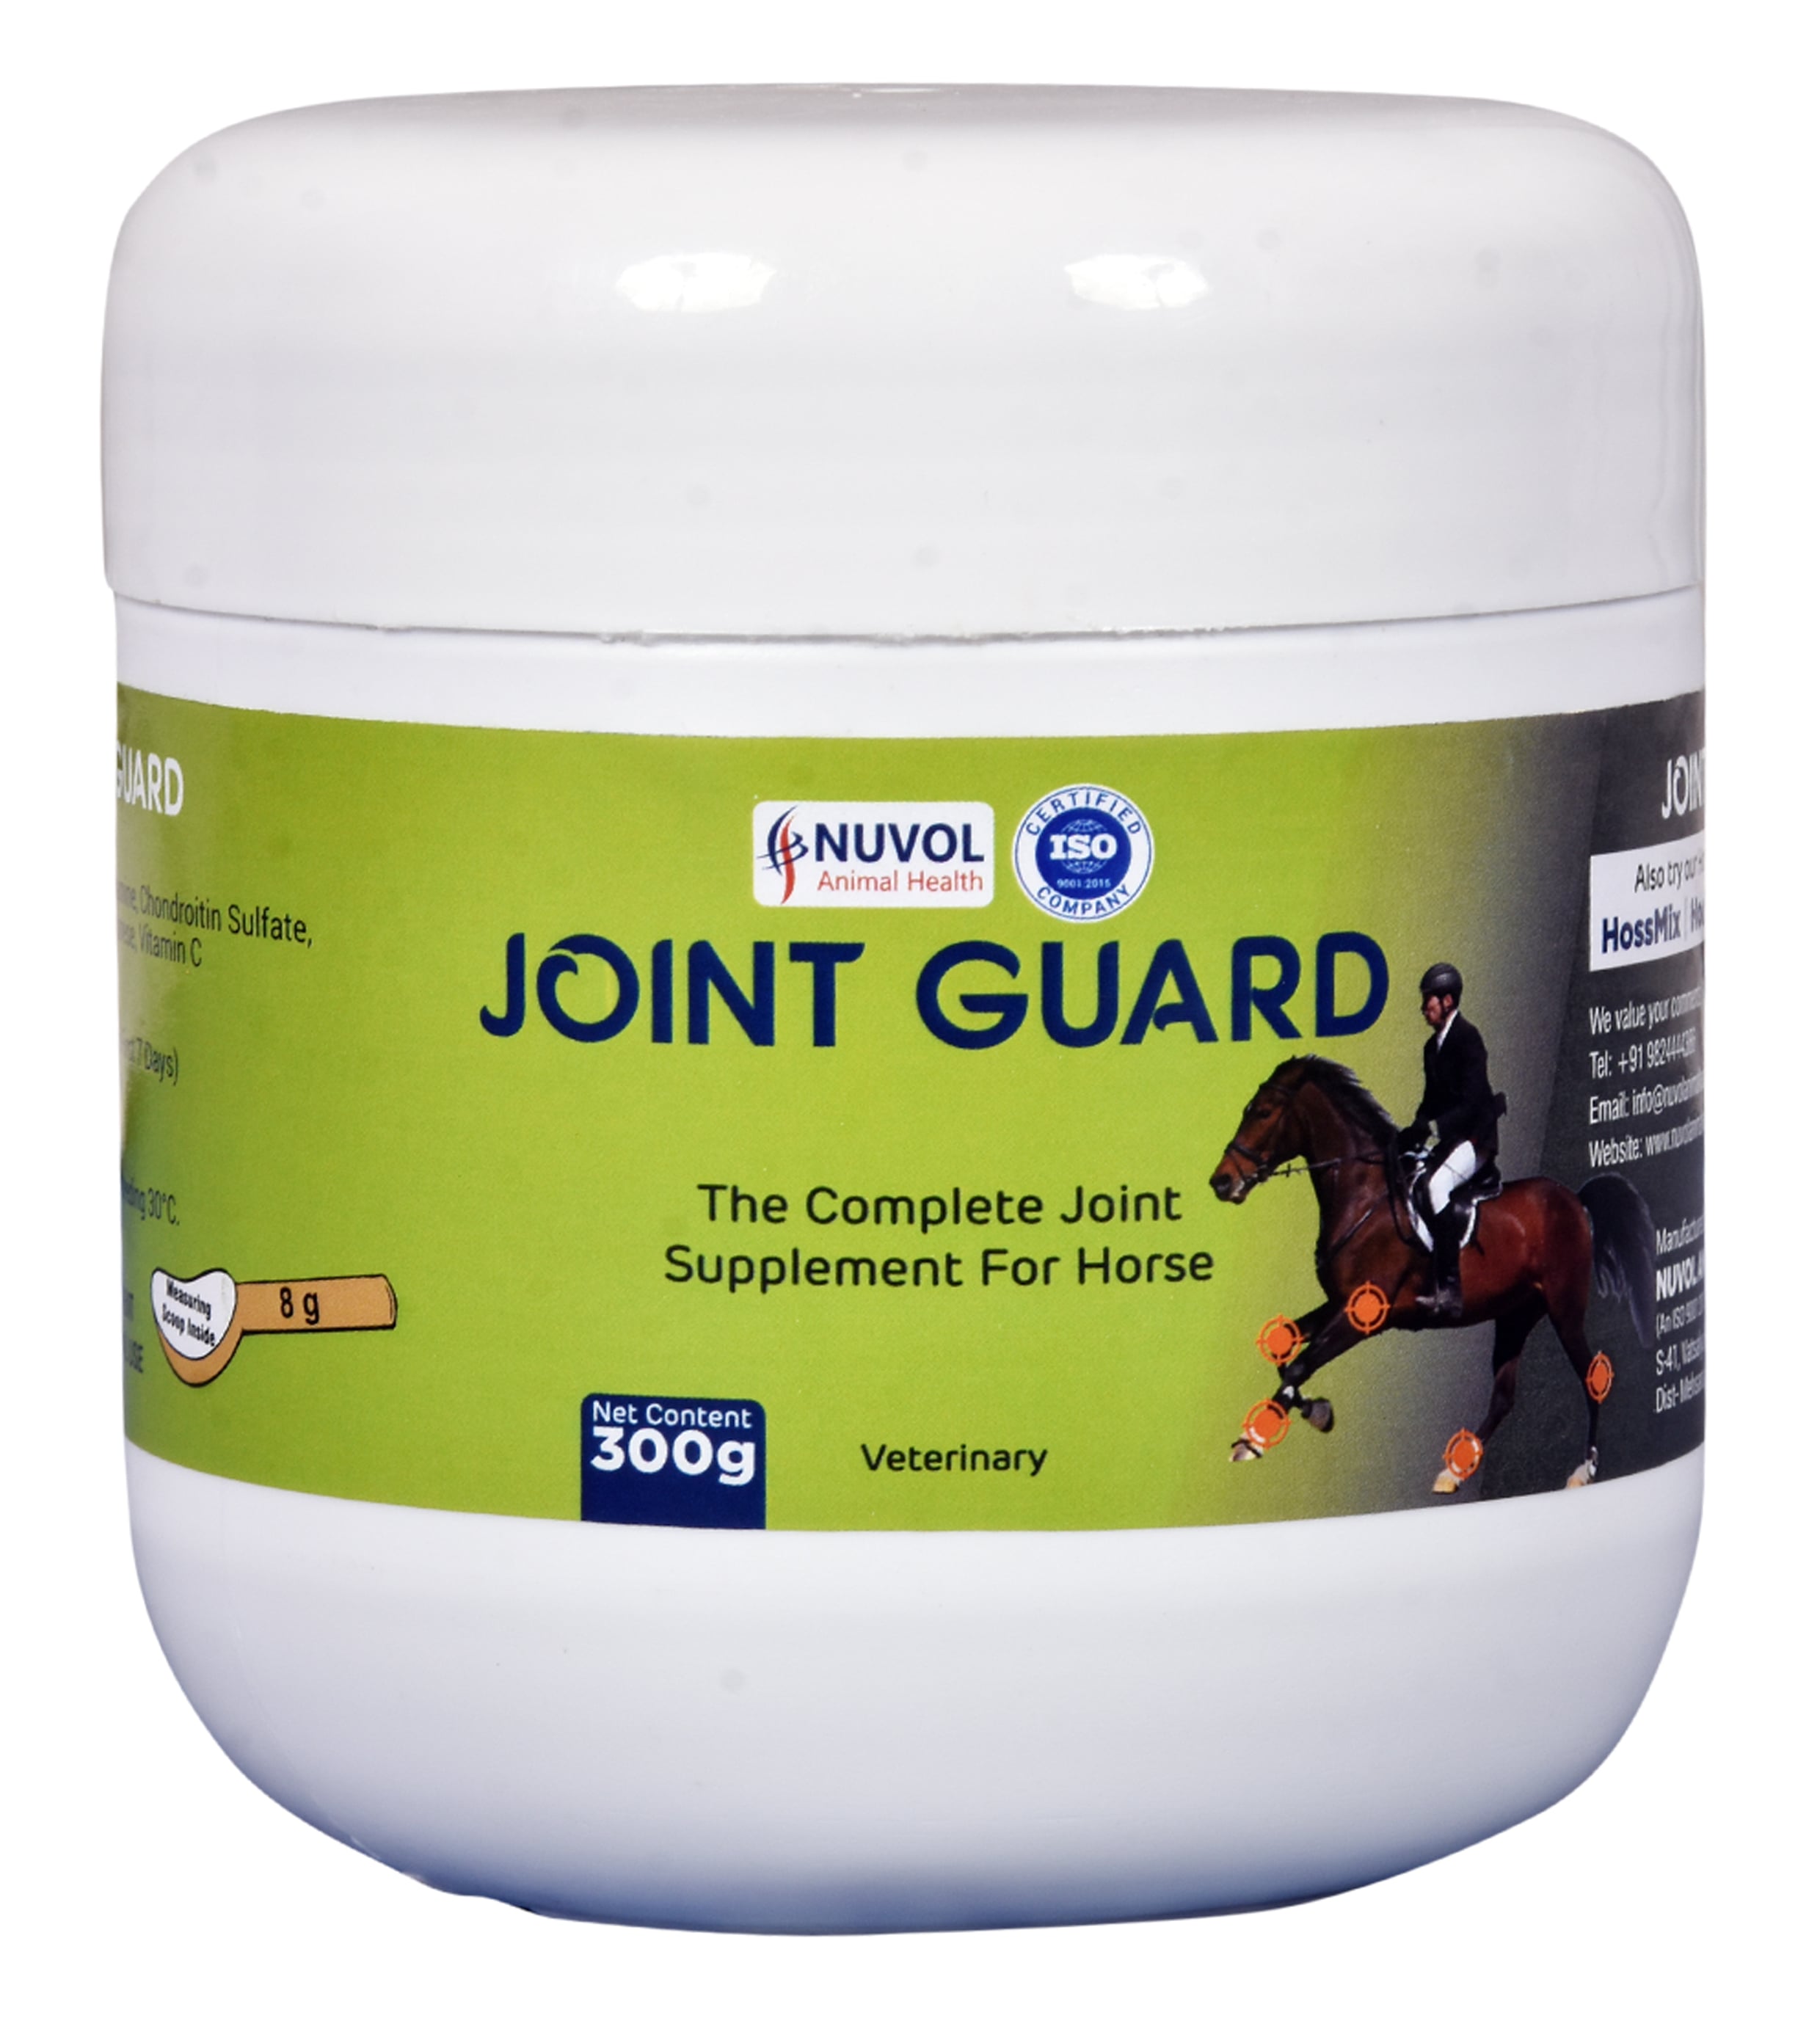 JOINT GUARD